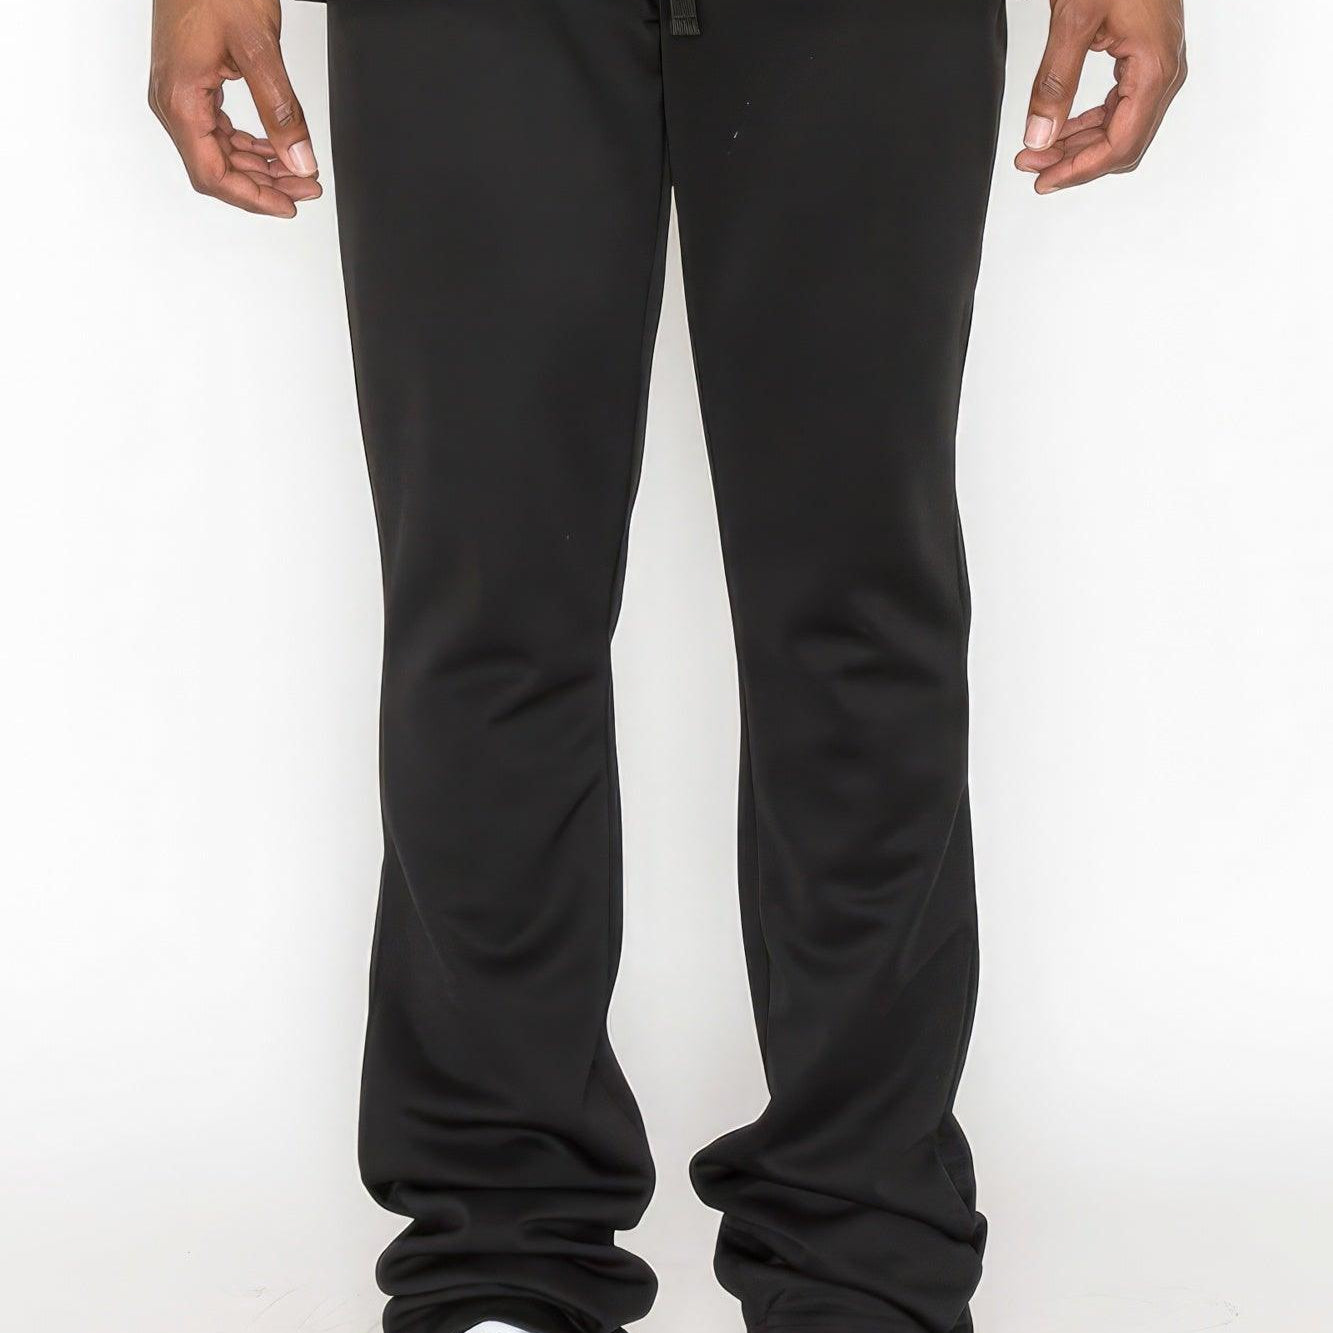 Men's Pants - Joggers Solid Black Flare Stacked Track Pants